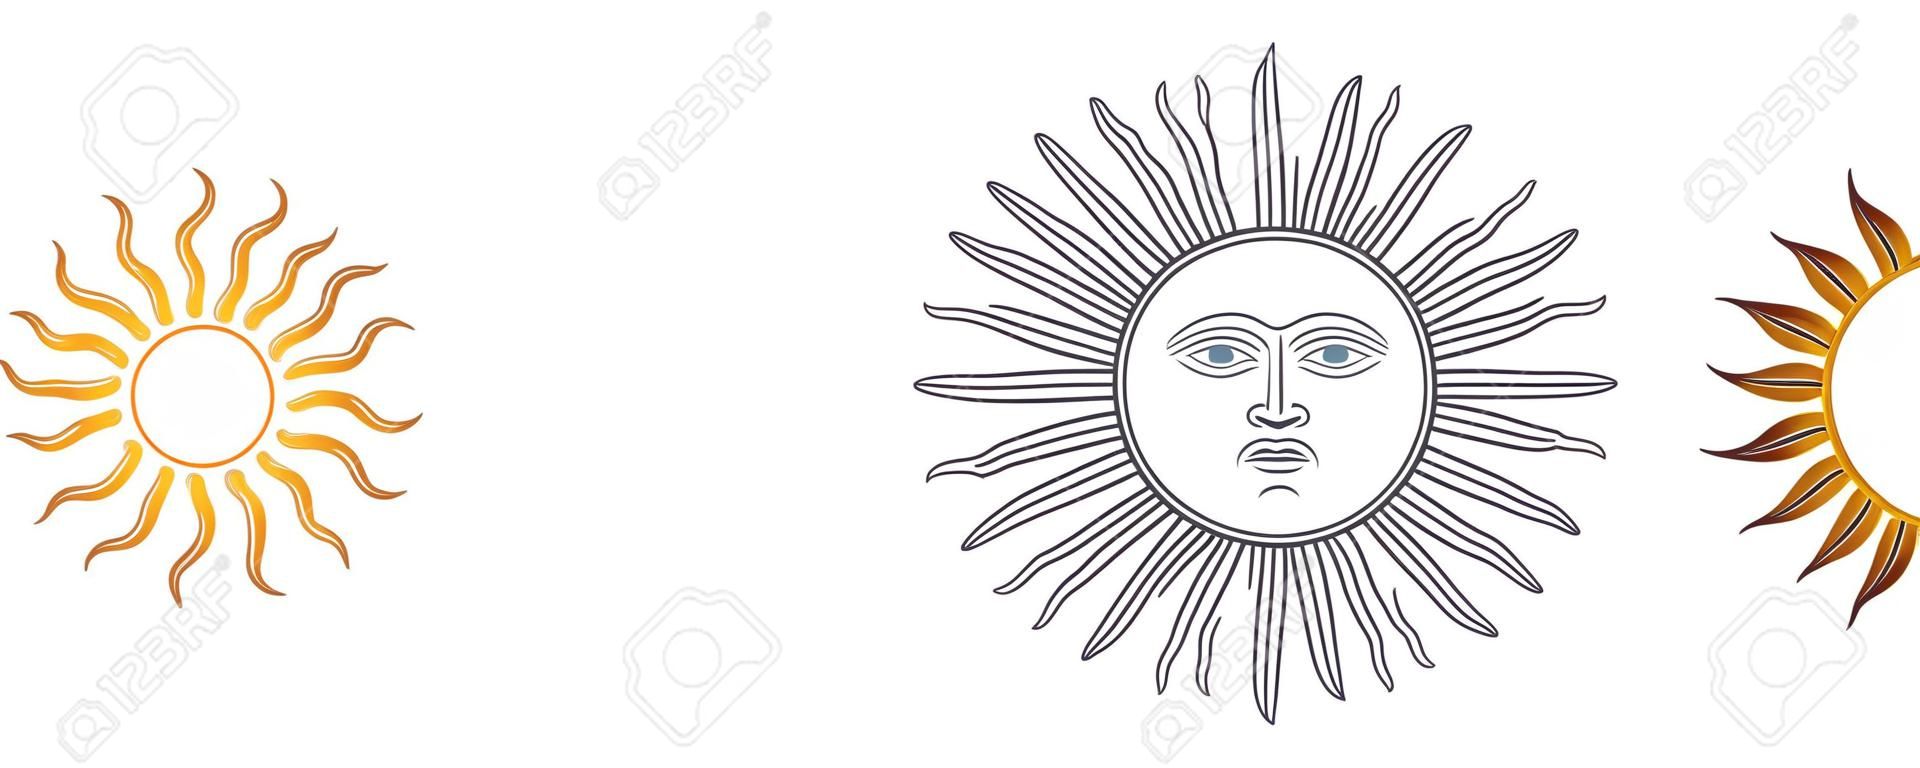 Sun of May variations. Spanish Sol de Mayo, national emblems of Uruguay and Argentina. Radiant, silver or golden yellow sun with human face and straight and wavy rays. Illustration over white. Vector.